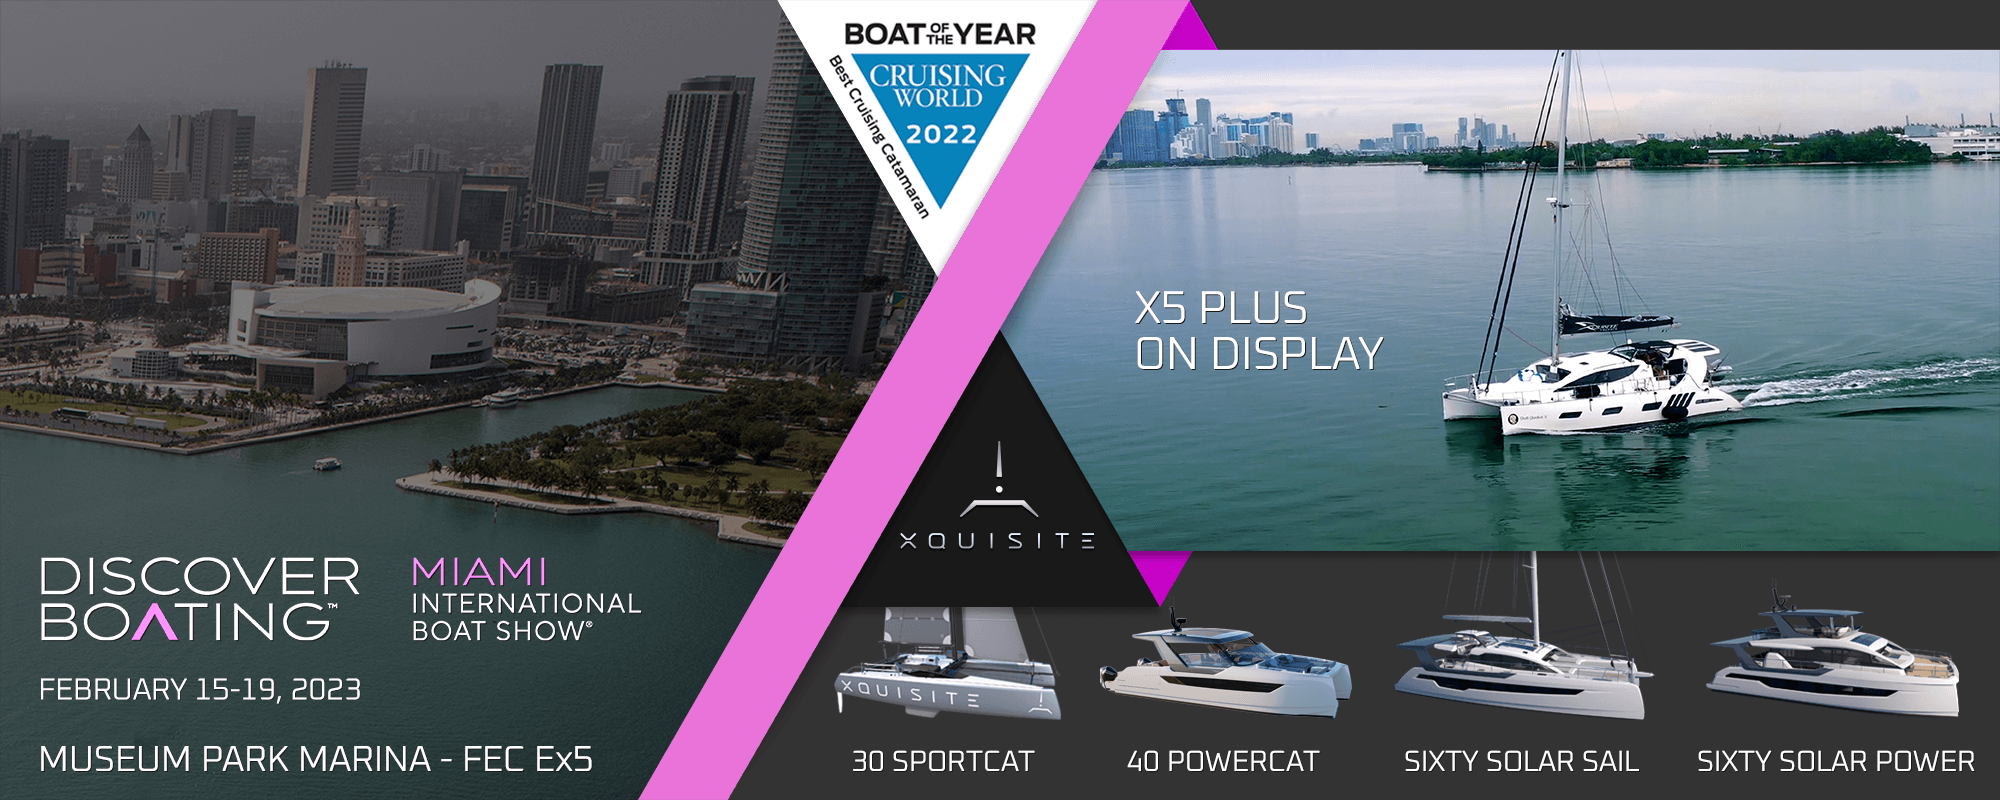 Xquisite Yachts on Miami Boat Show 2023 